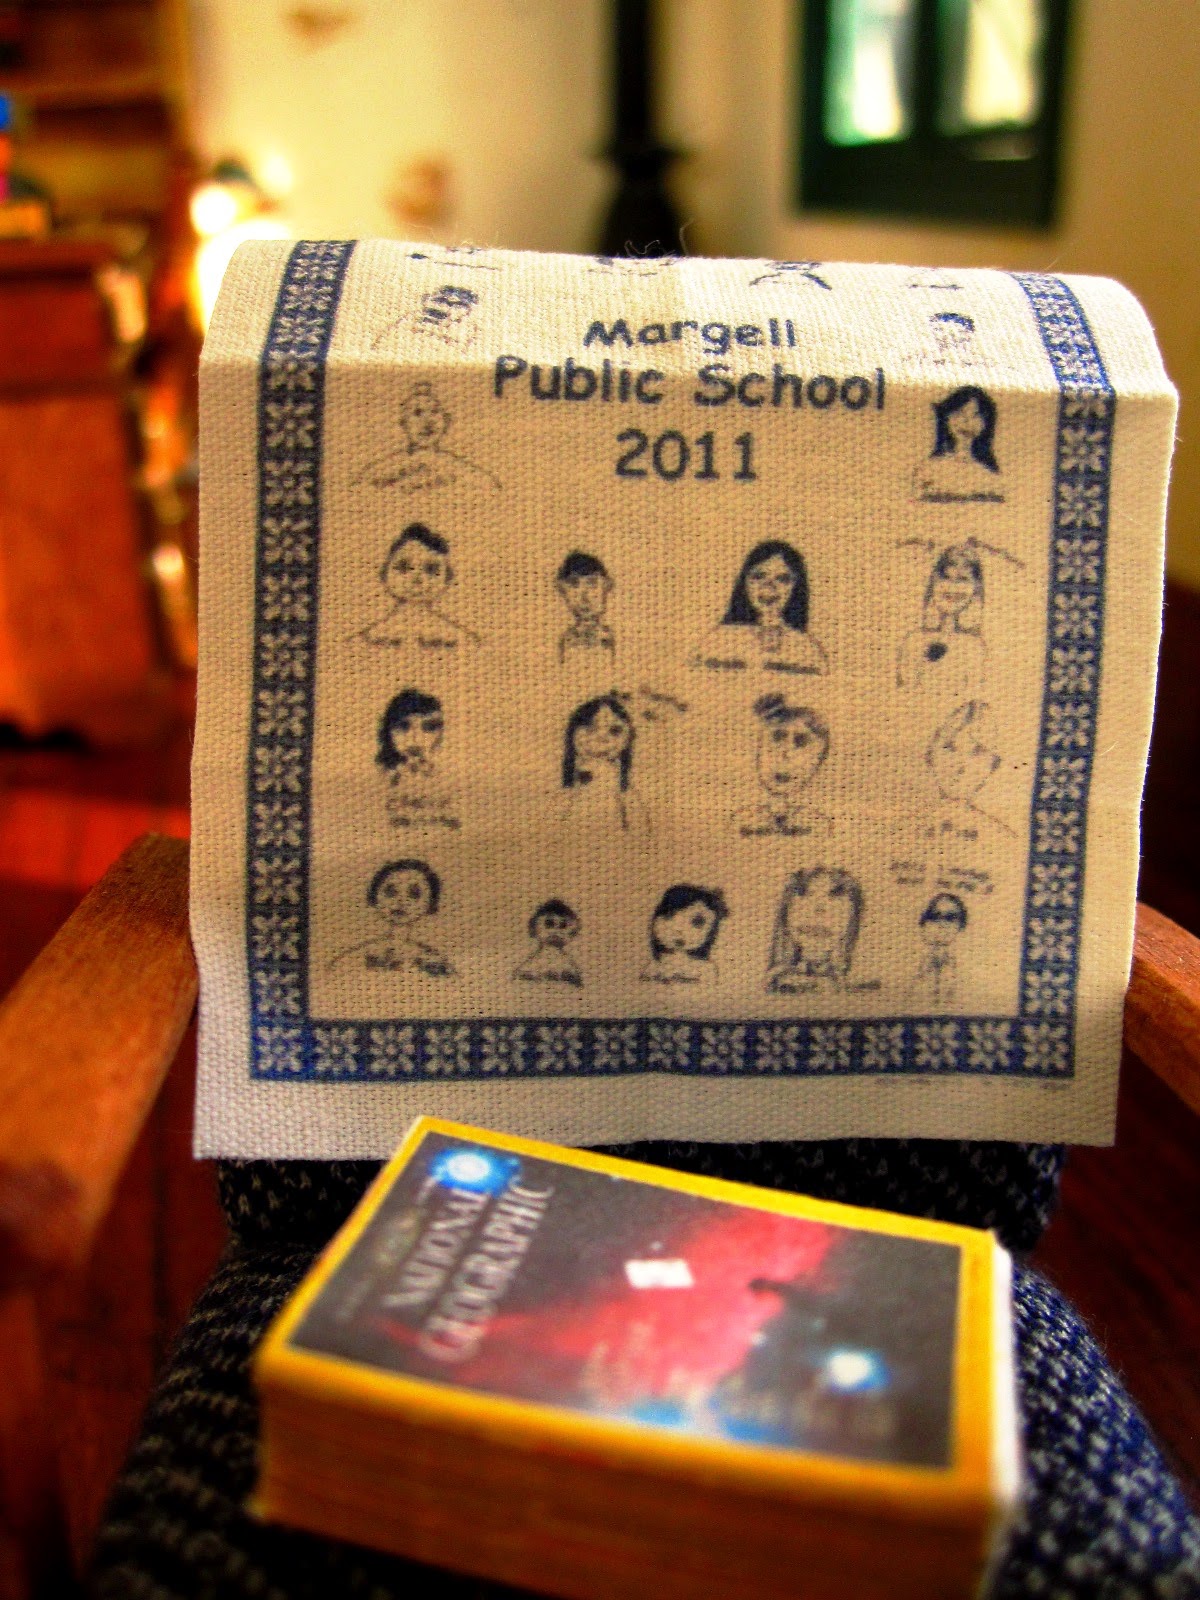 Close up of a 1950s-style miniature chair, displaying a 2011 fund-raising tea towel for Margell Public School and a stack of old National Geographic magazines.